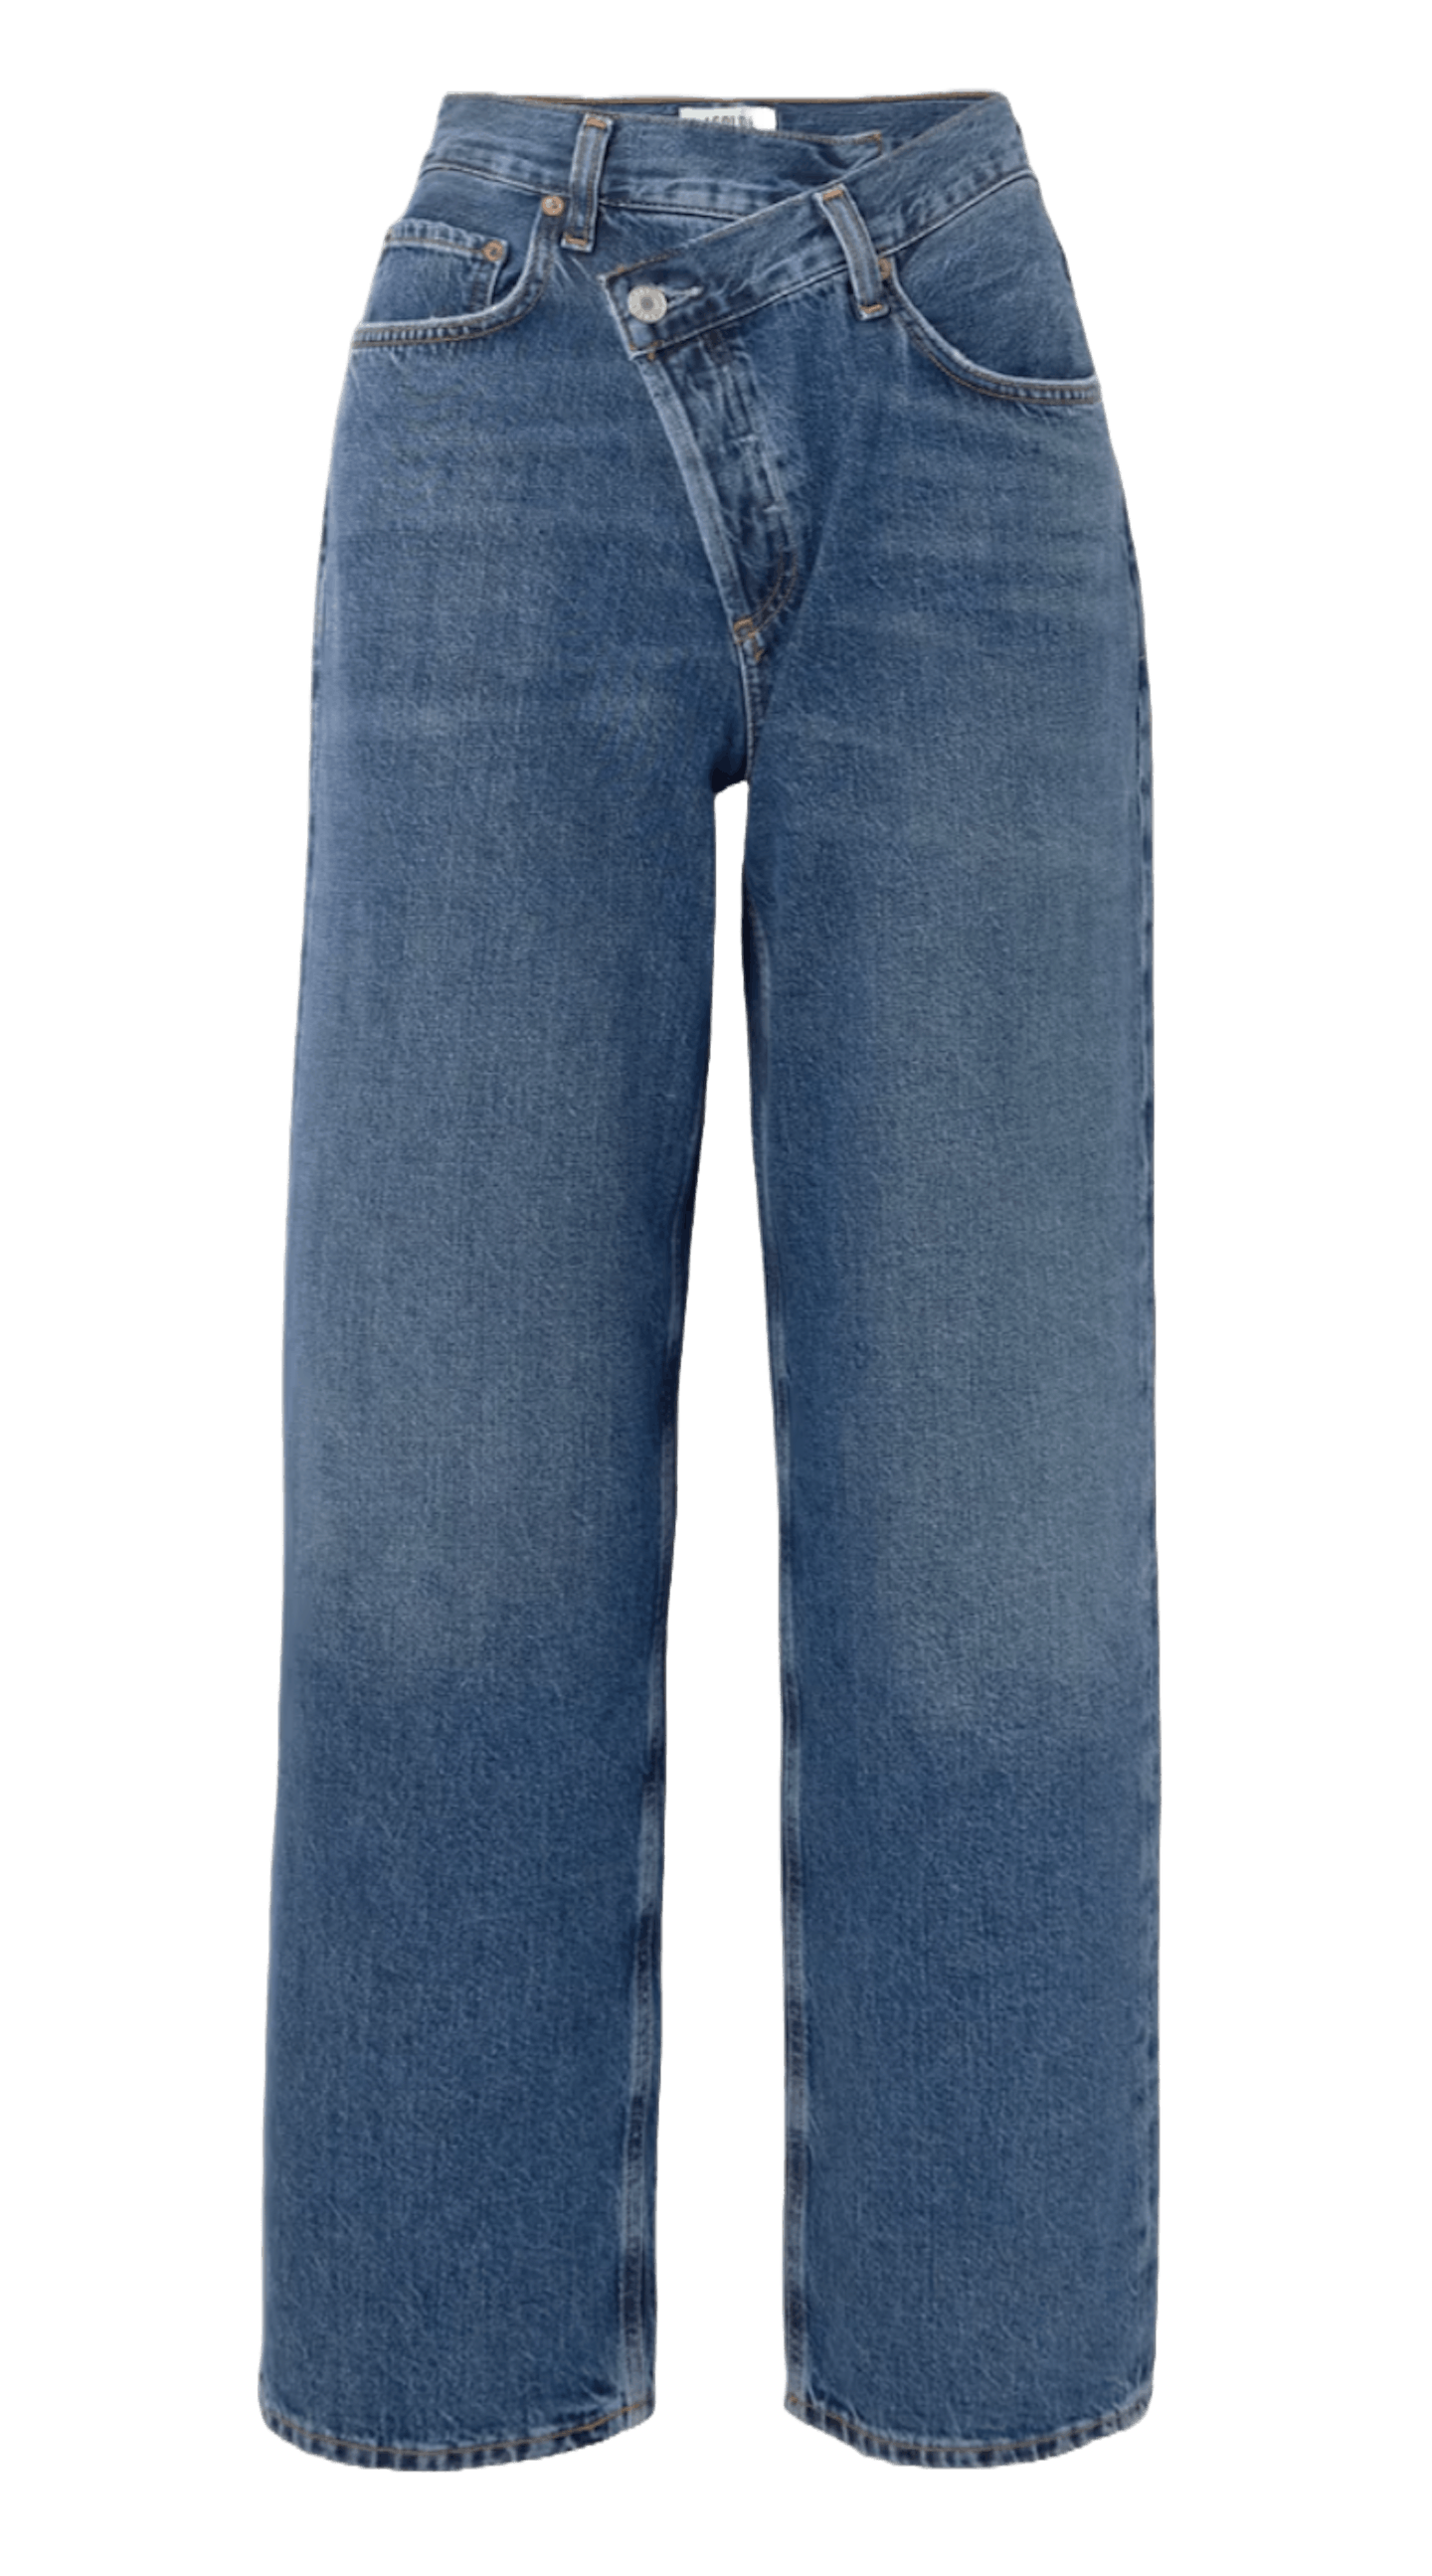 Agolde jeans